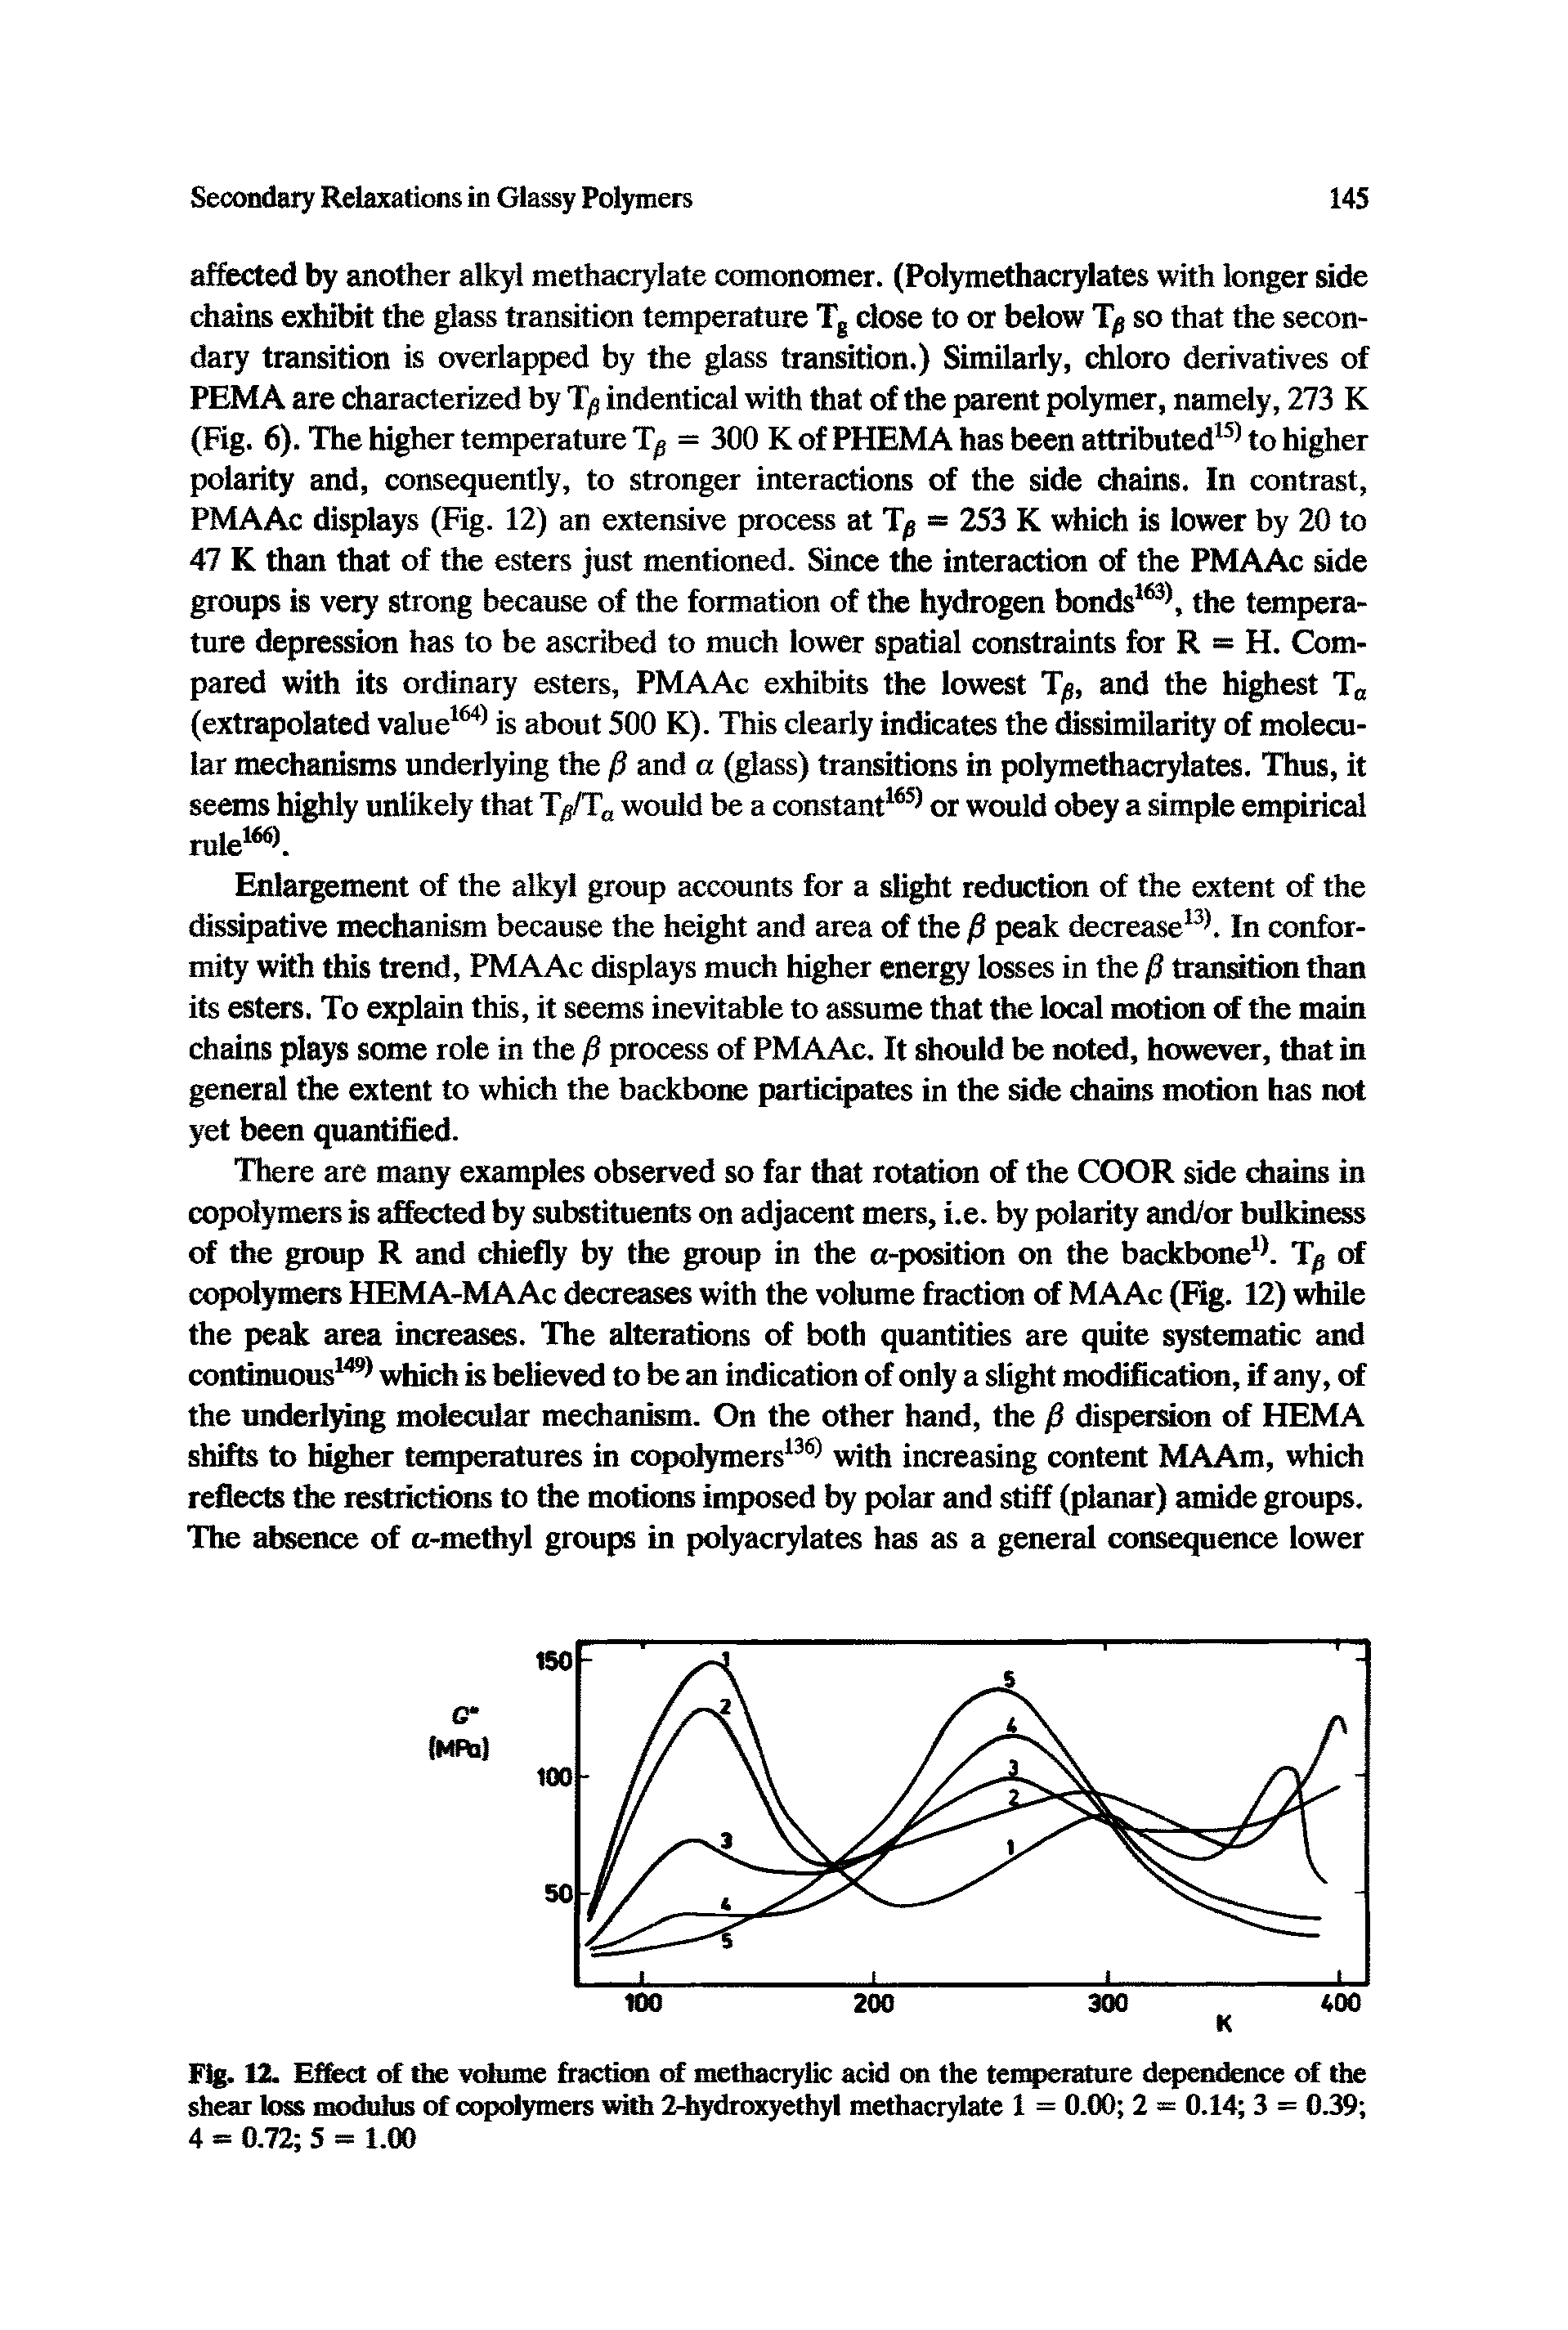 Fig. 12. Effect of the volume fraction of methacrylic acid on the temperature dependence of the shear loss modulus of copolymers with 2-hydroxyethyl methacrylate 1 = 0.00 2 = 0.14 3 = 0.39 4 = 0.72 5 = 1.00...